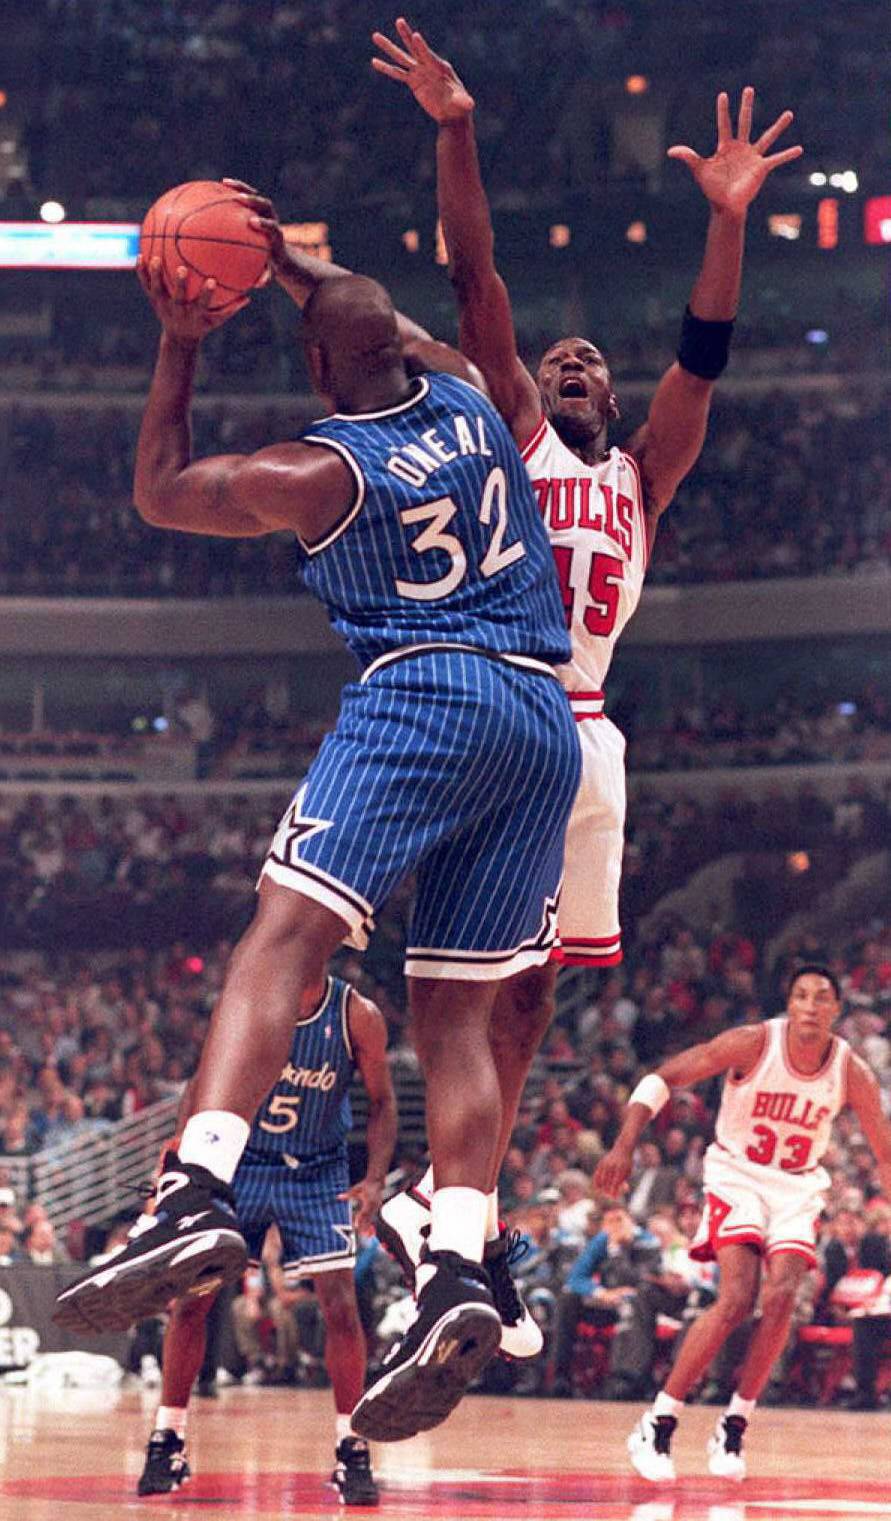 The 20th Anniversary of - Image 1 from Michael Jordan's Most Significant  Comeback Moments Wearing No. 45